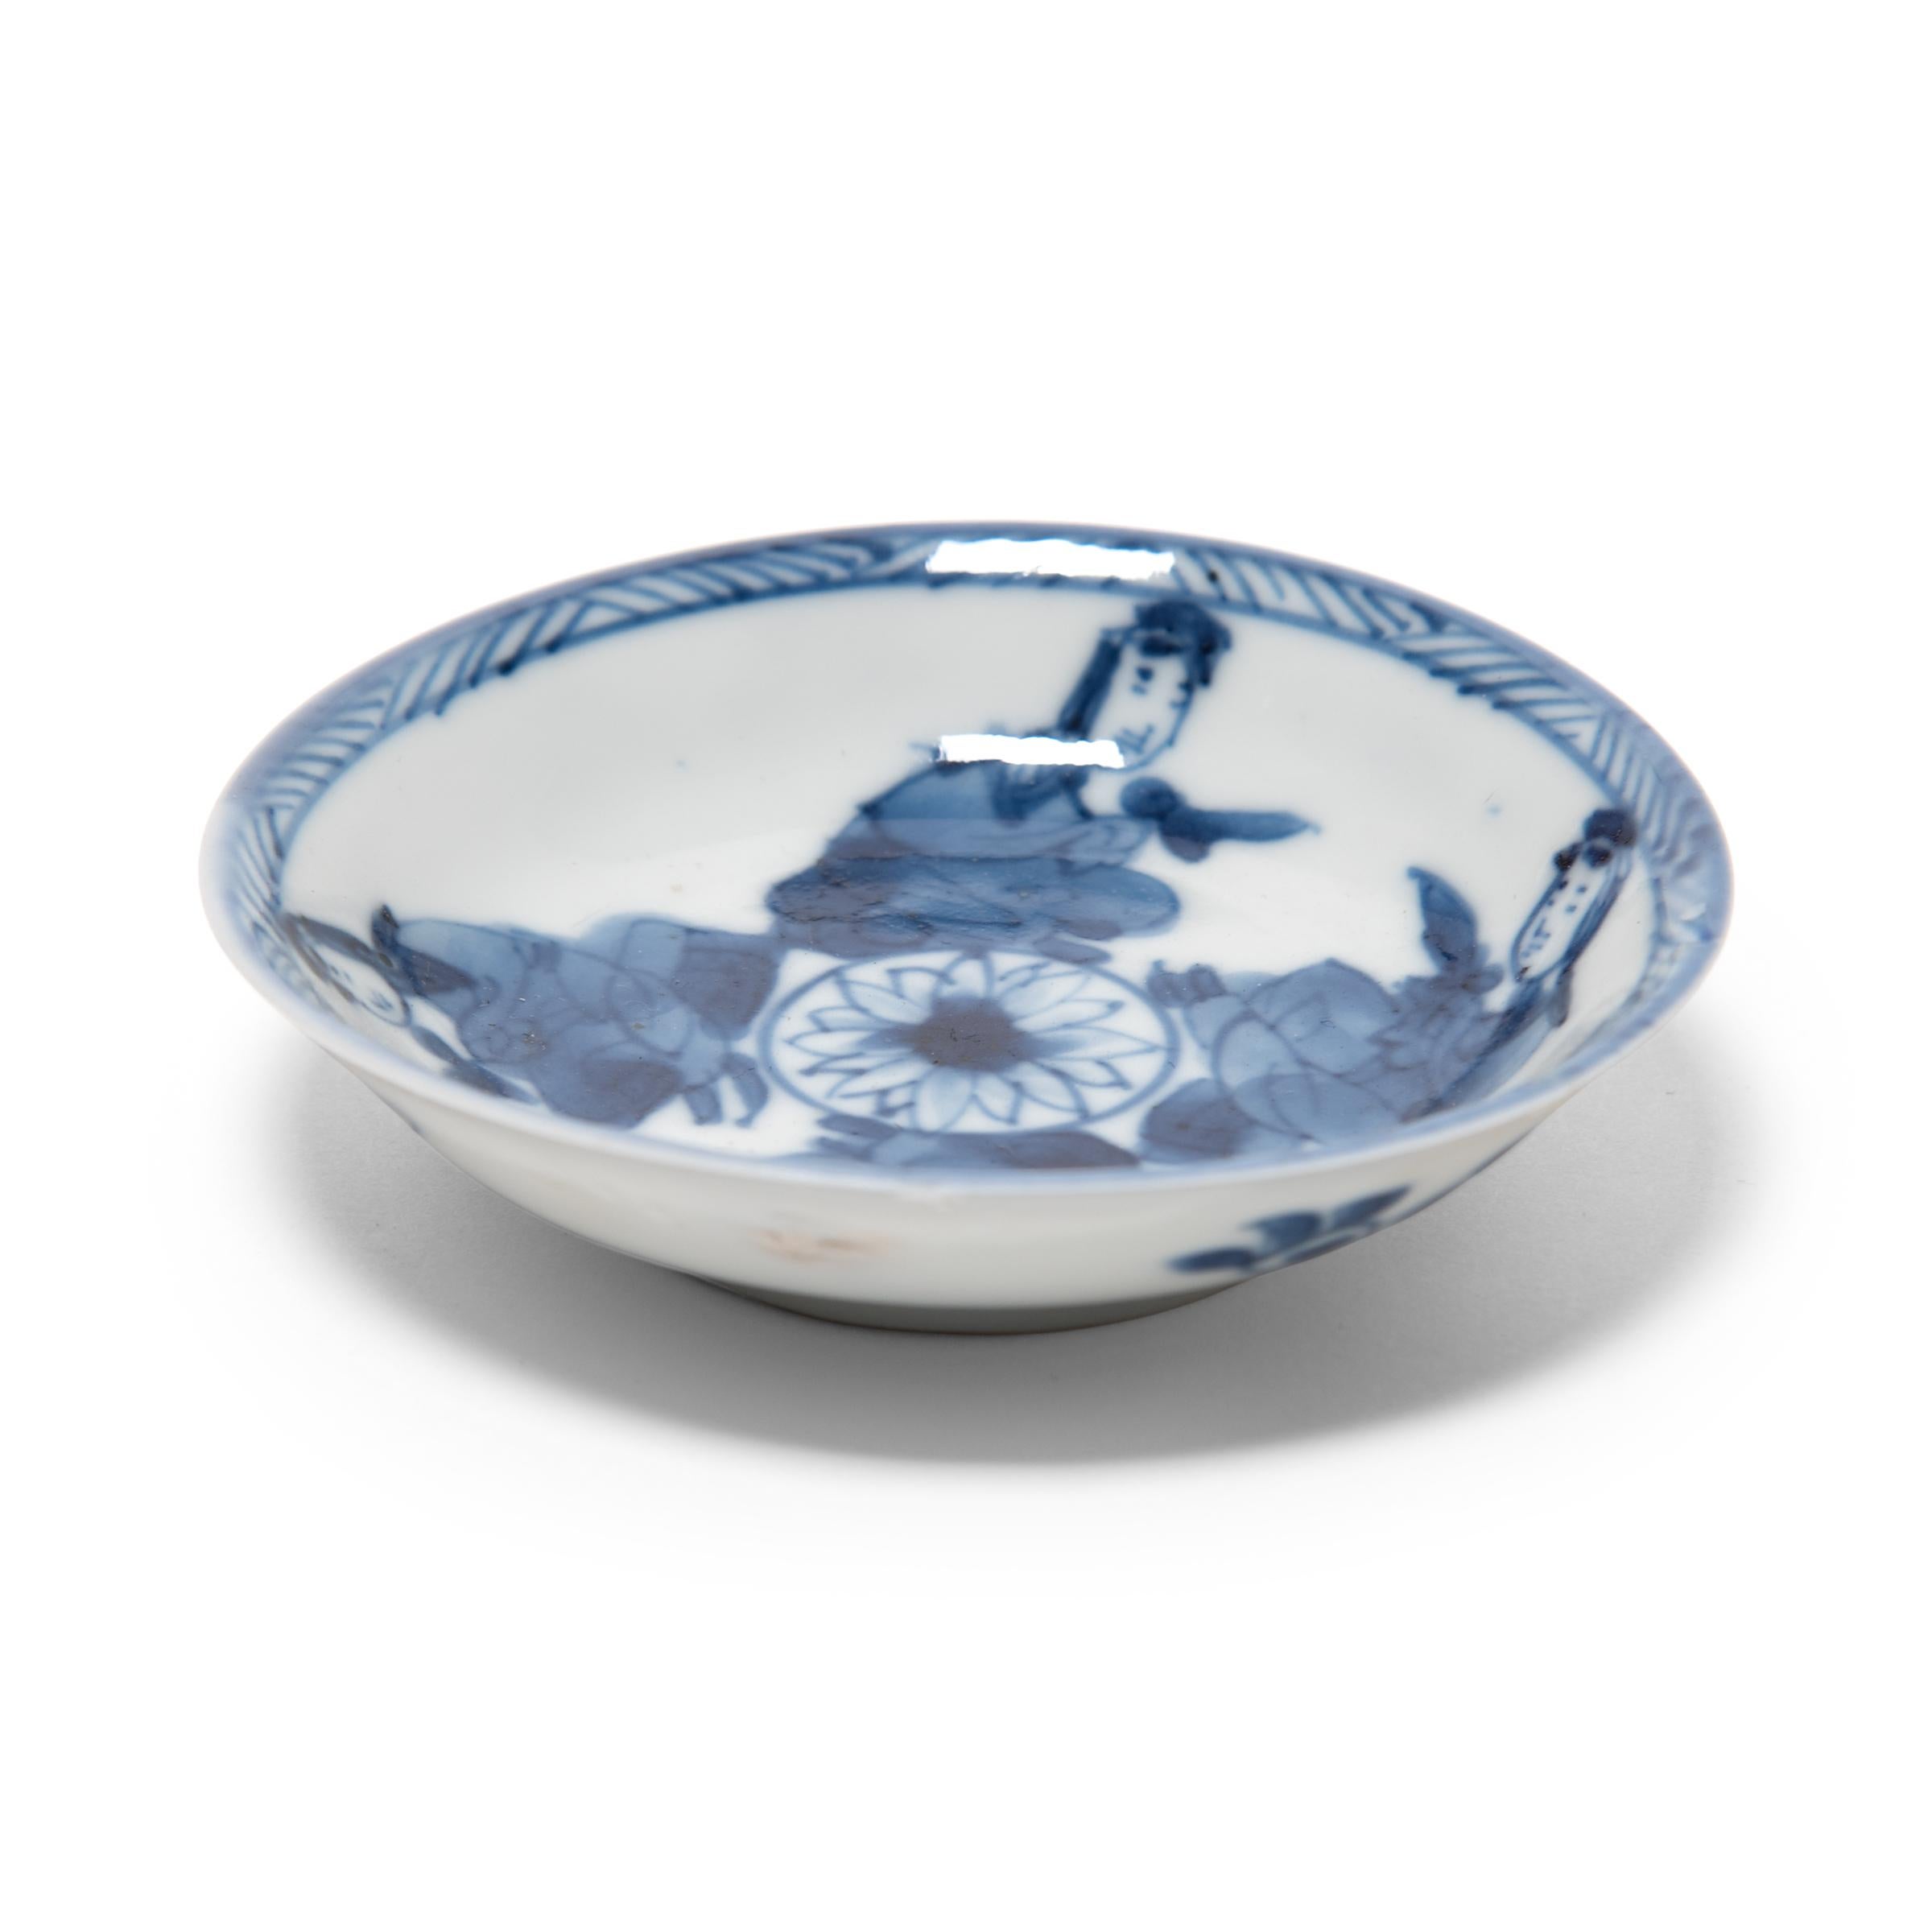 Qing Petite Chinese Blue and White Dish, C. 1850